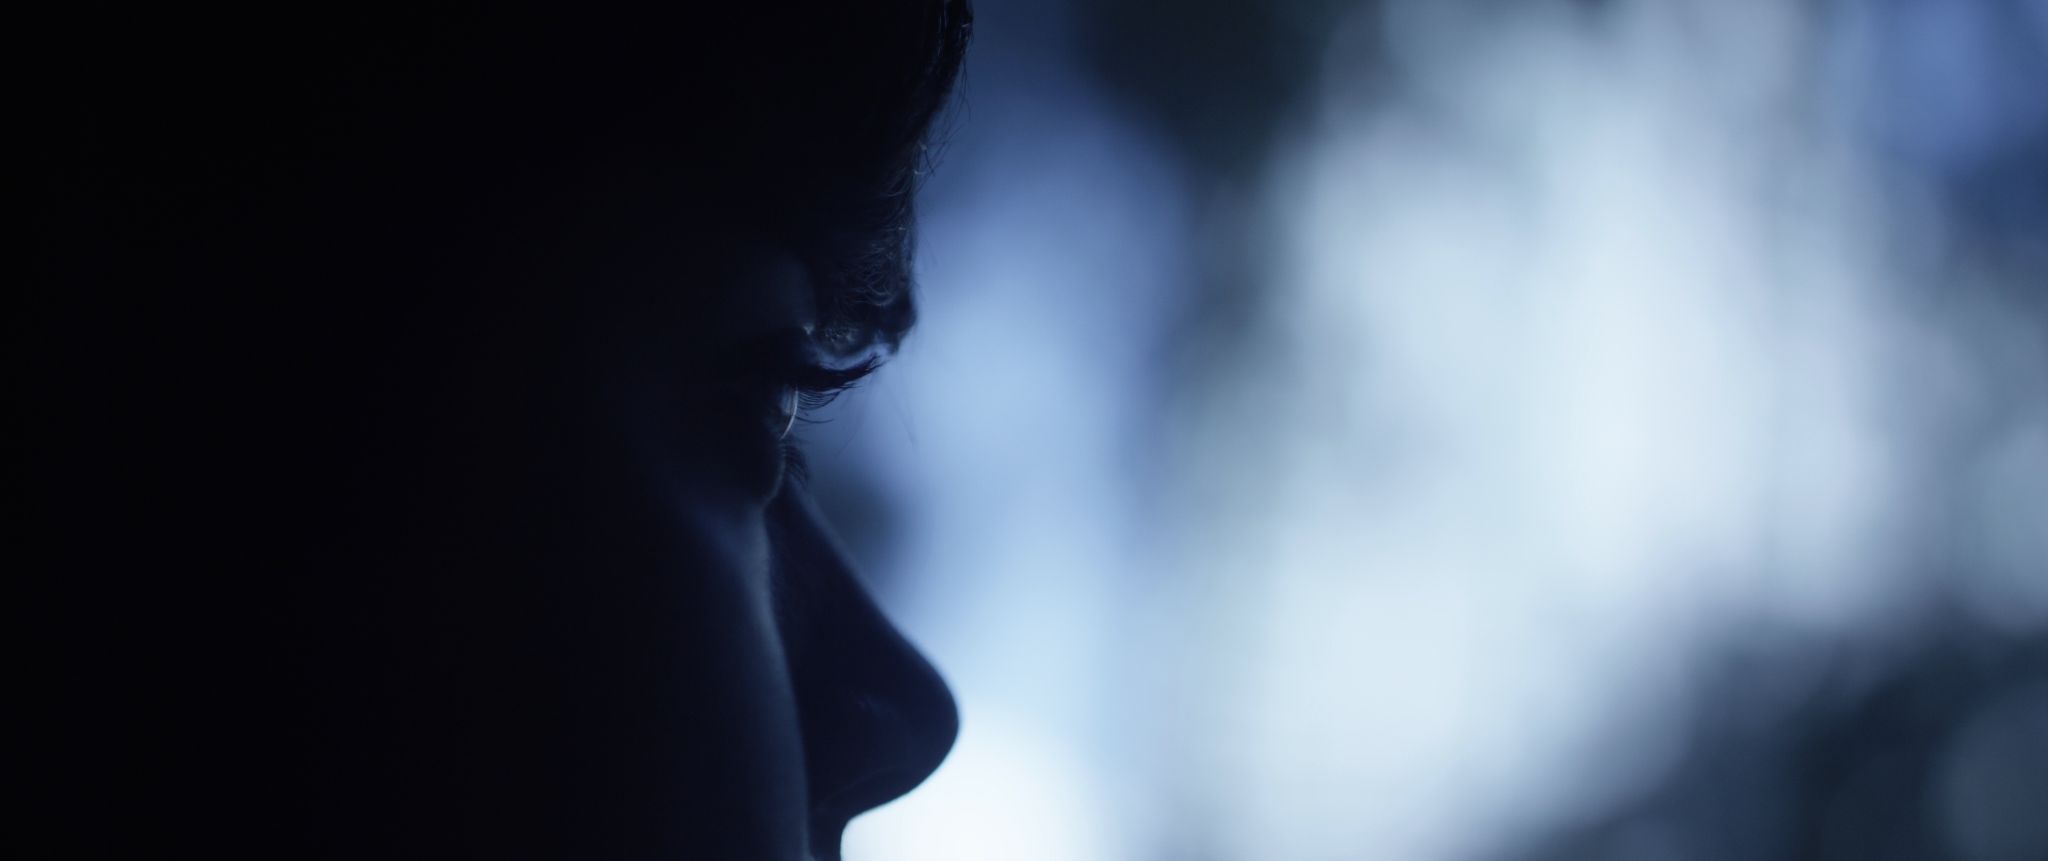 Side profile of person in semidarkness